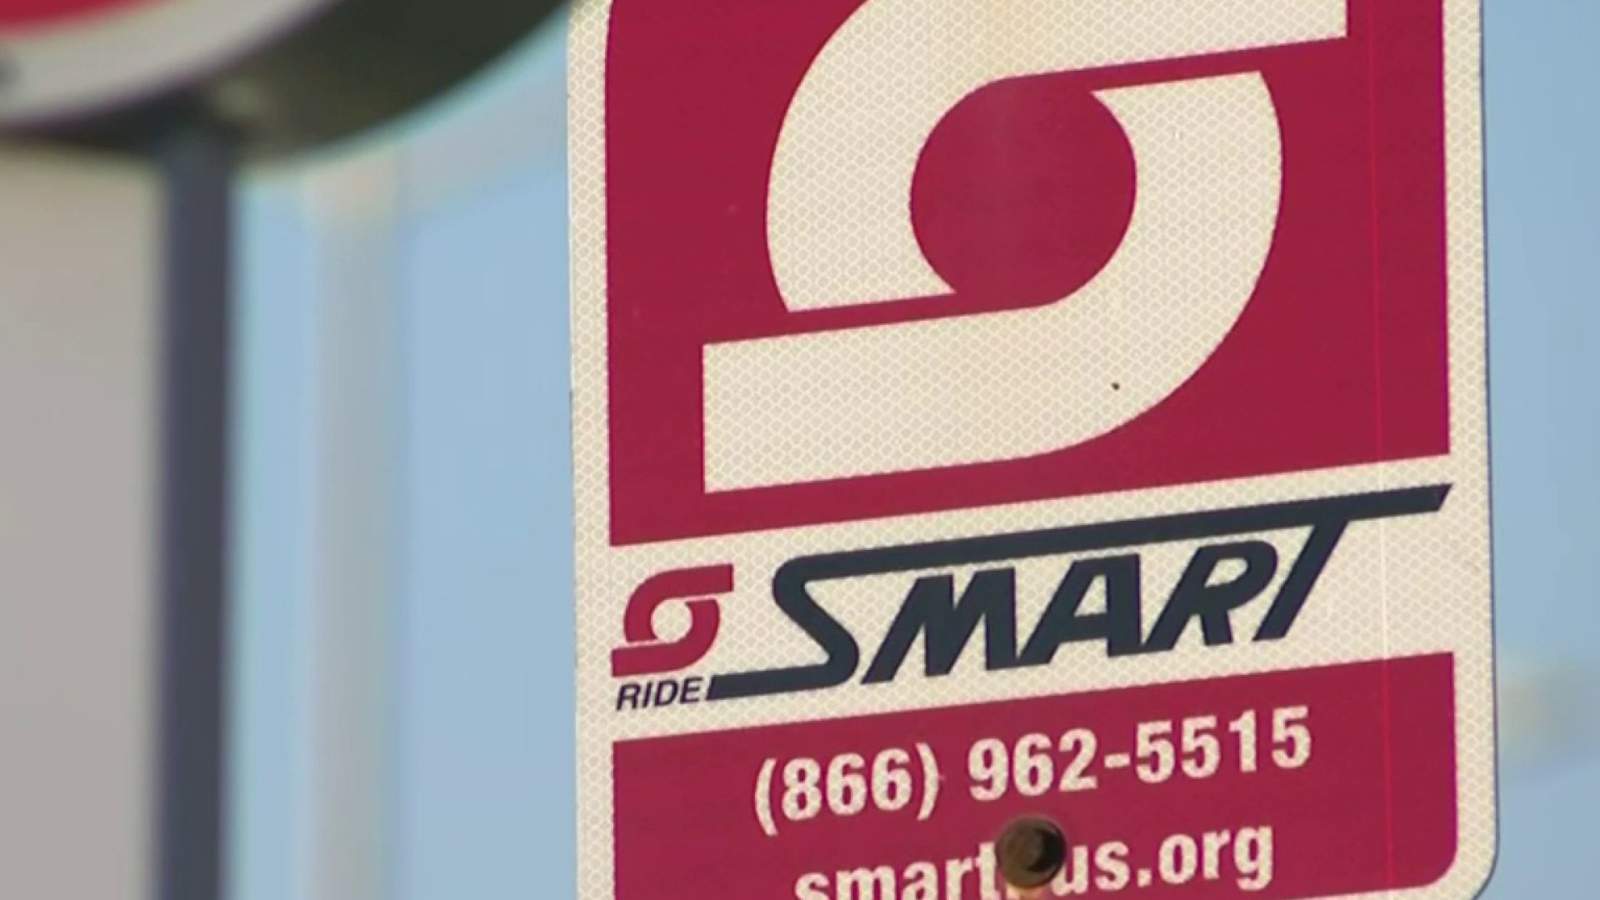 New face mask requirement protects passengers using SMART in Metro Detroit from coronavirus